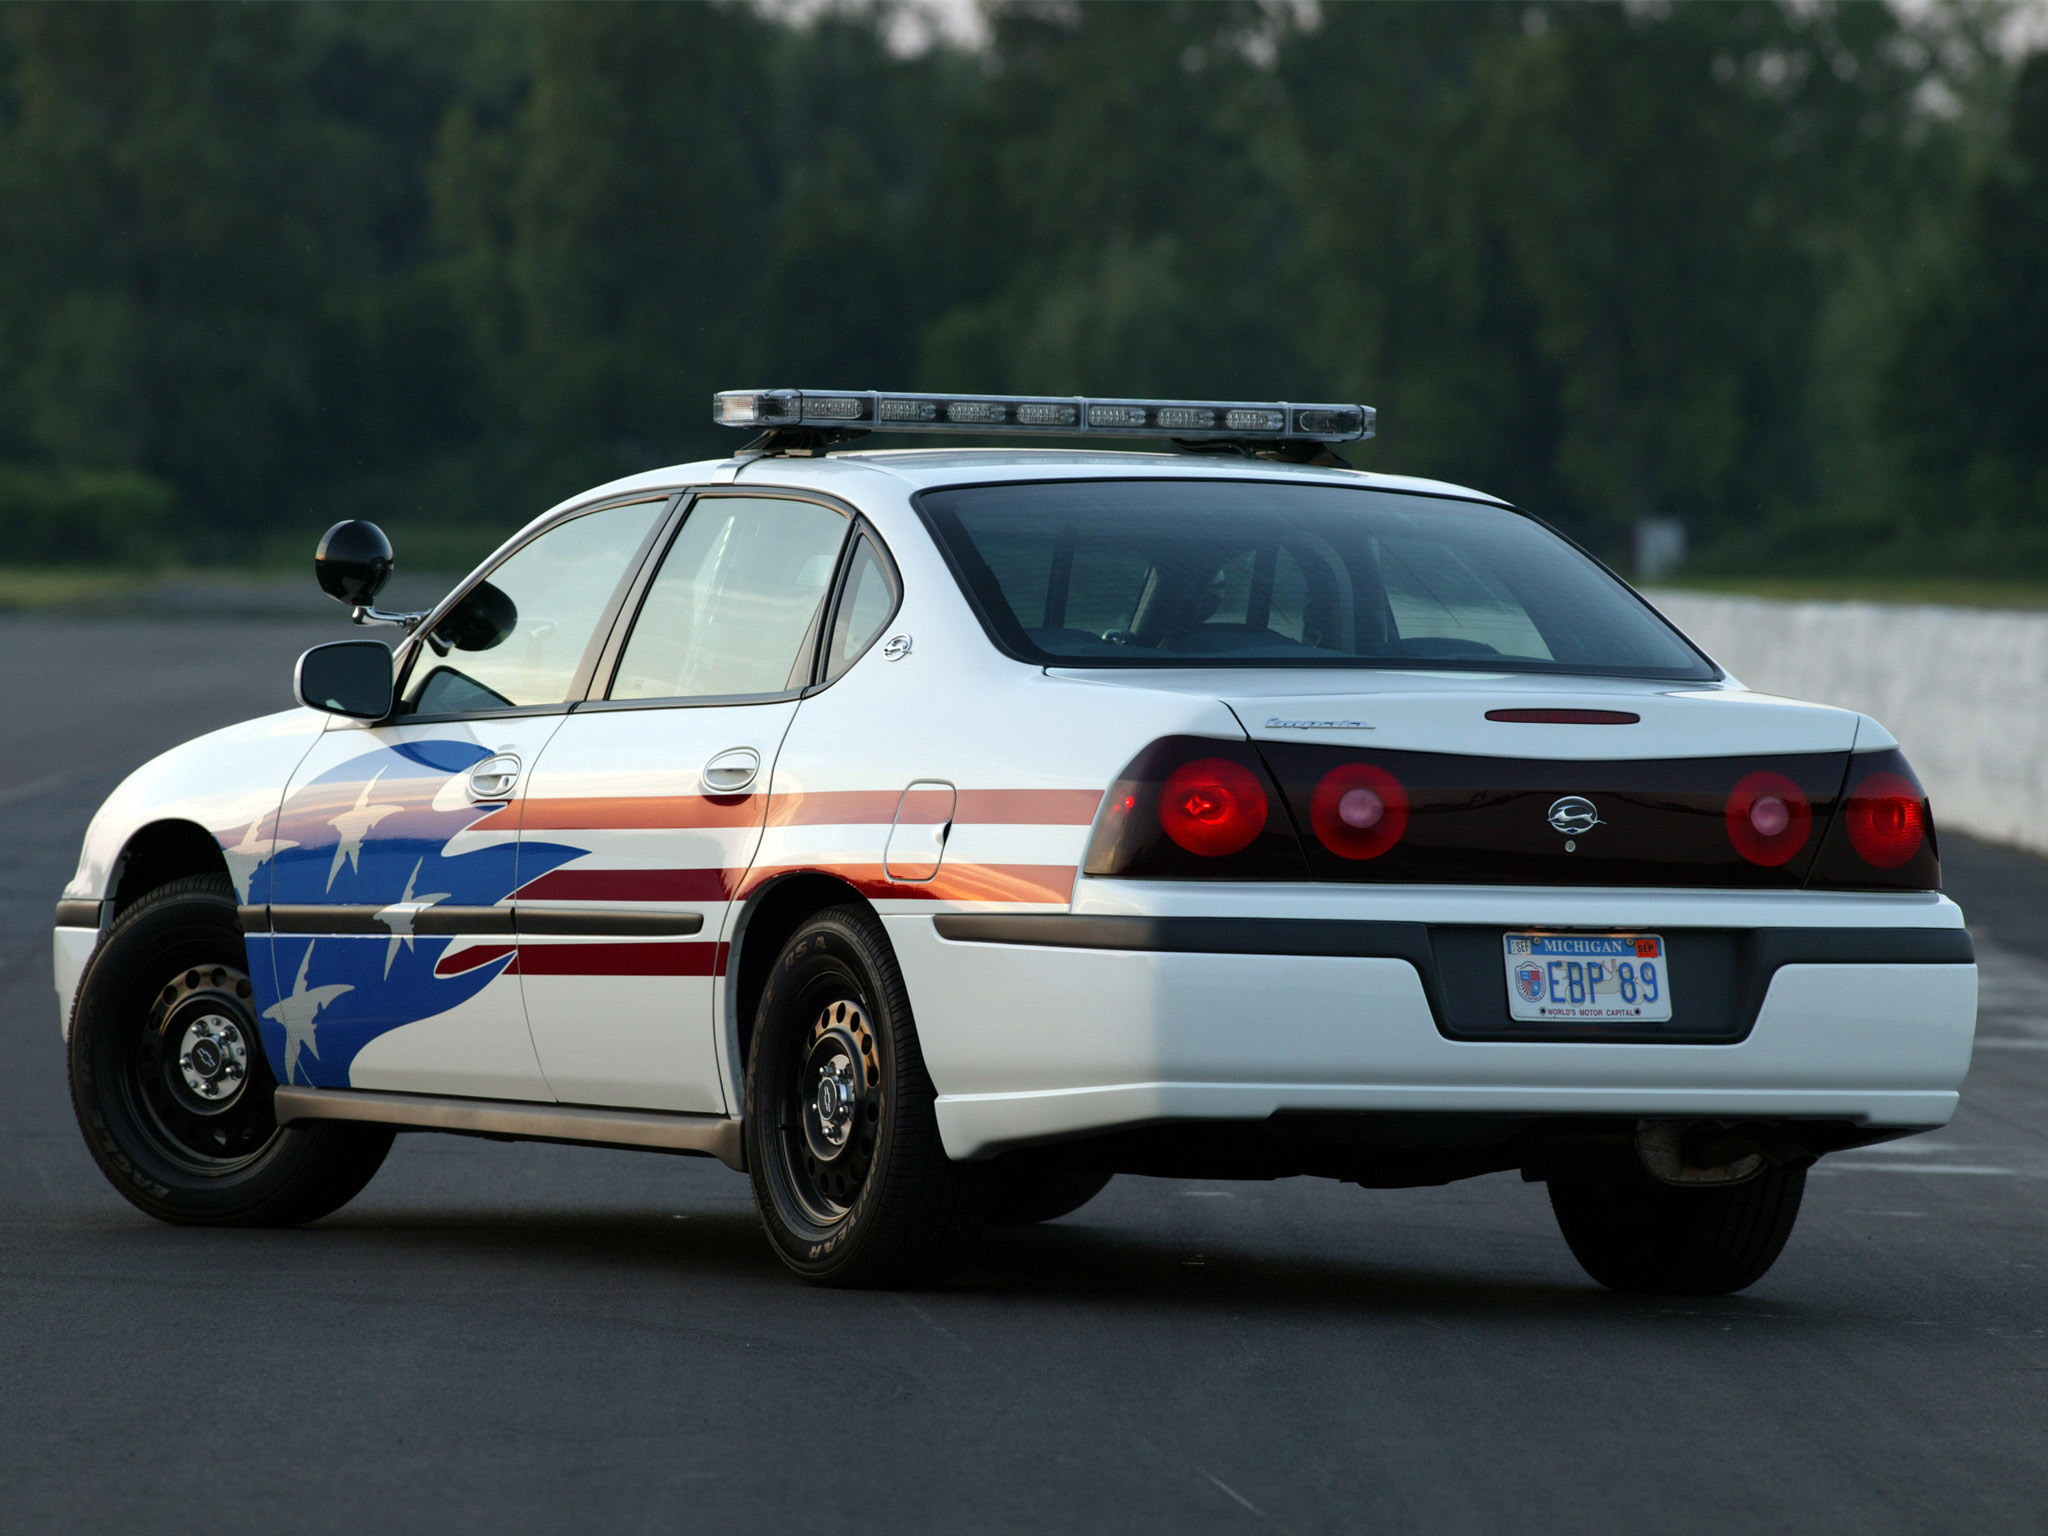 2003, Chevrolet, Impala, Police, Muscle Wallpaper